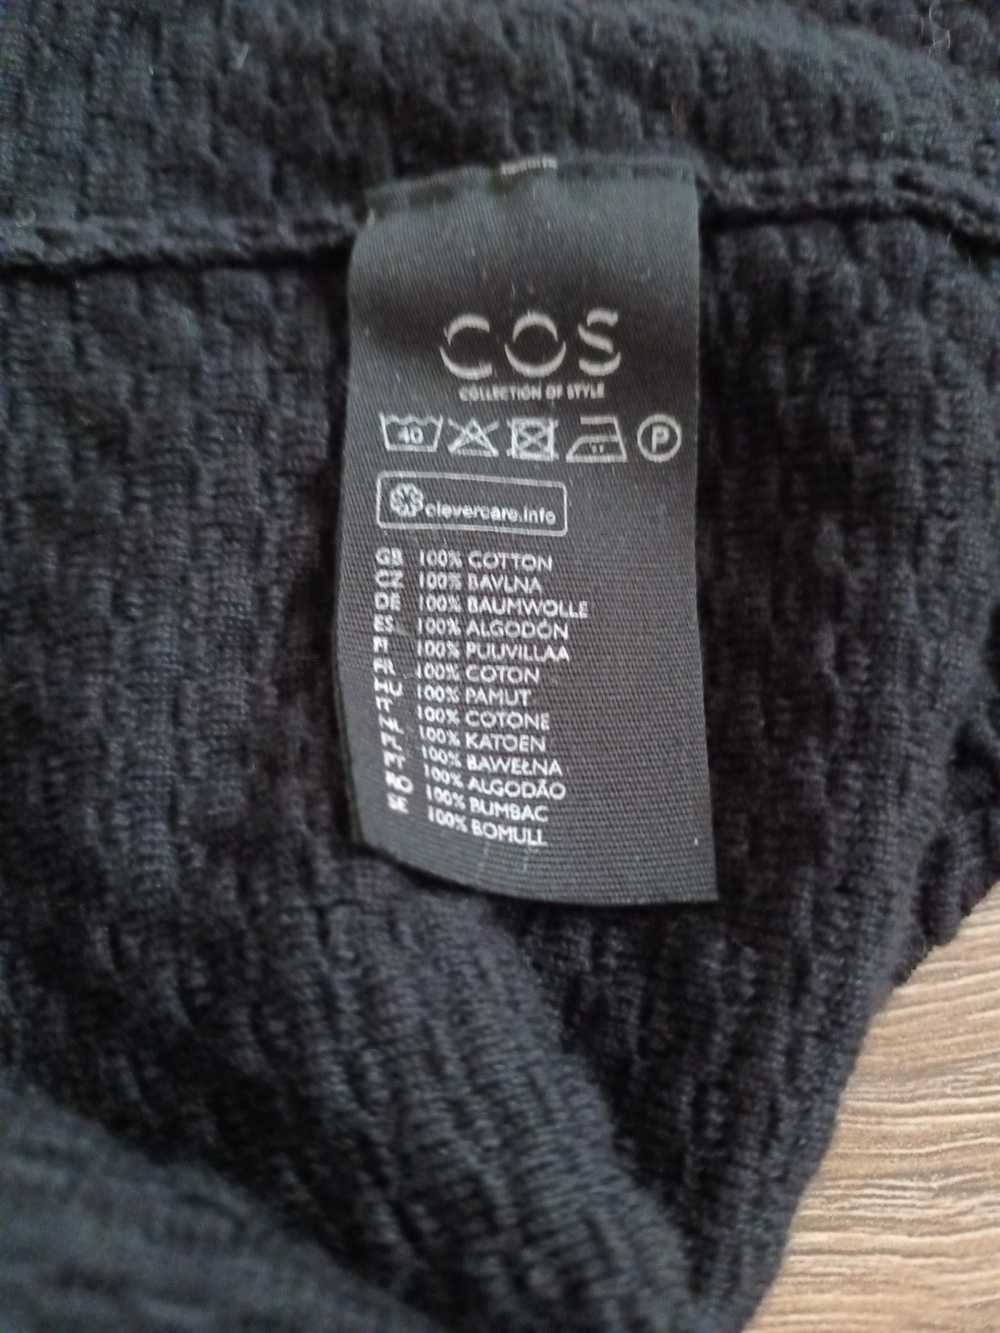 Cos COS Womens Waffle Knit Black Sweater Size XS - image 5